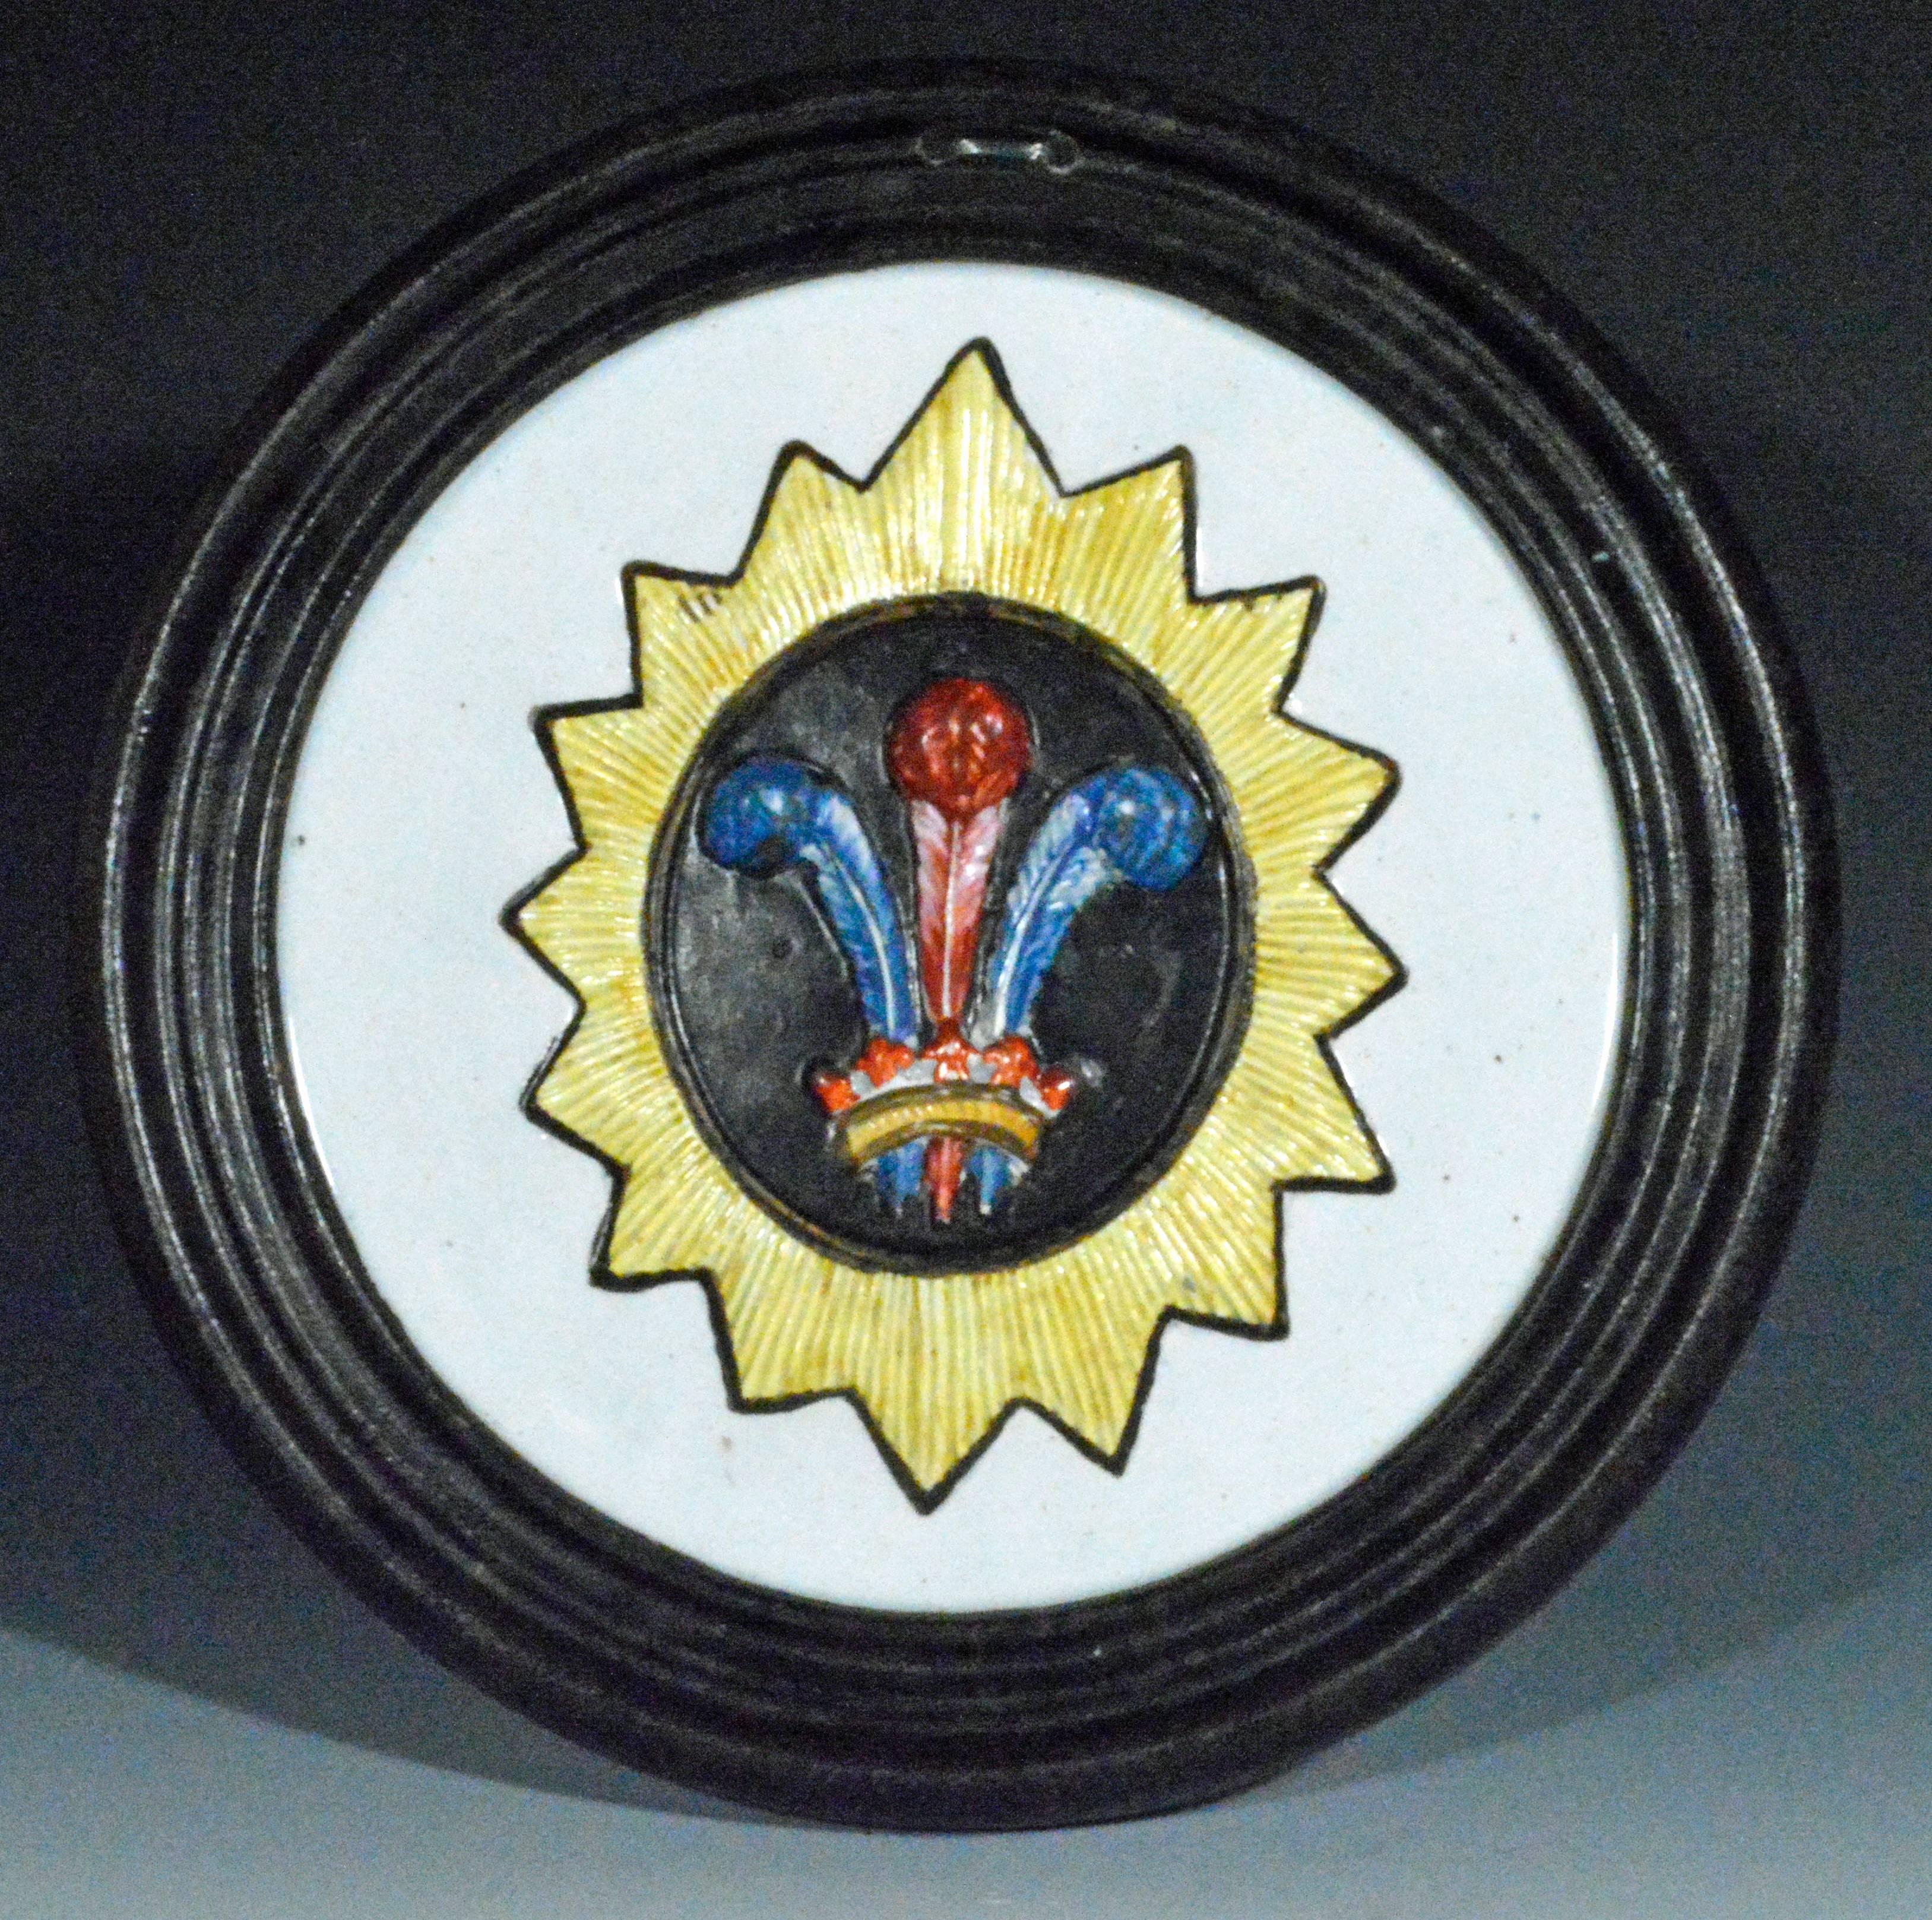 The large unusual Prattware circular plaques with a black outer border and a central molded panel are decorated with colored Prince of Wales feathers. These seem to be a unique pair being the only ones known.